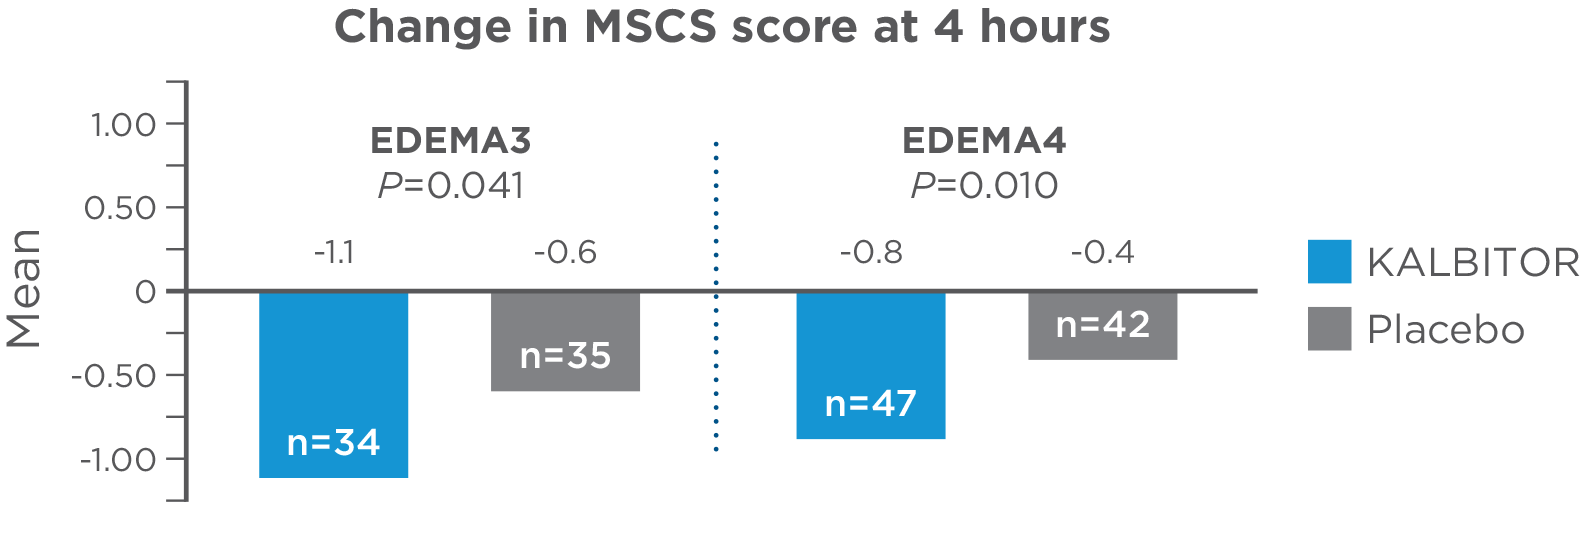 Change in MSCS score at 4 hours for patients taking KALBITOR vs Placebo